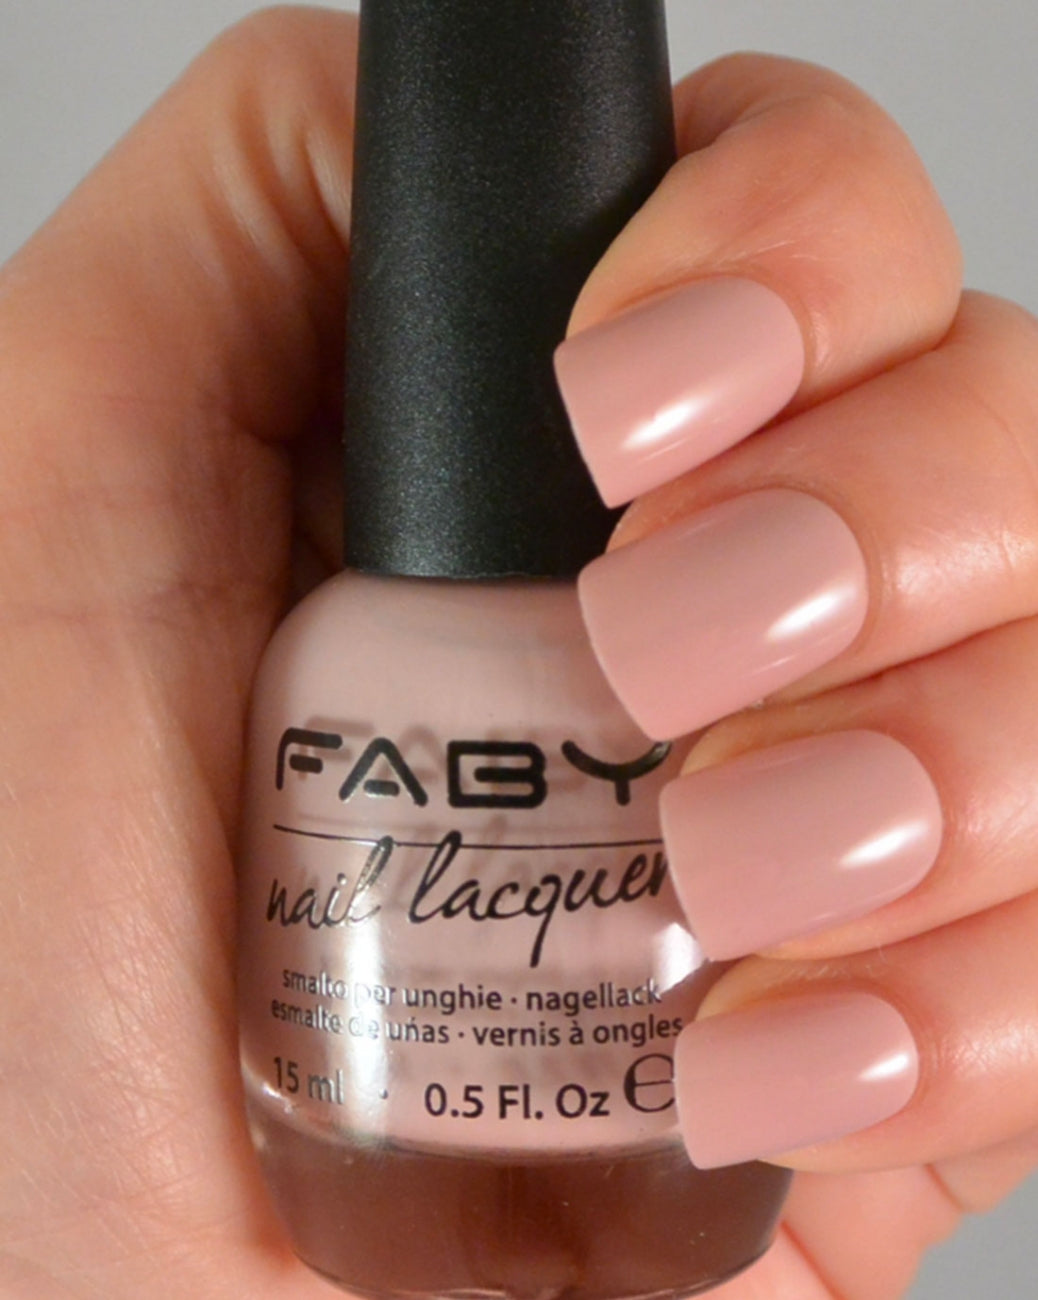 Faby Naturally 15ml